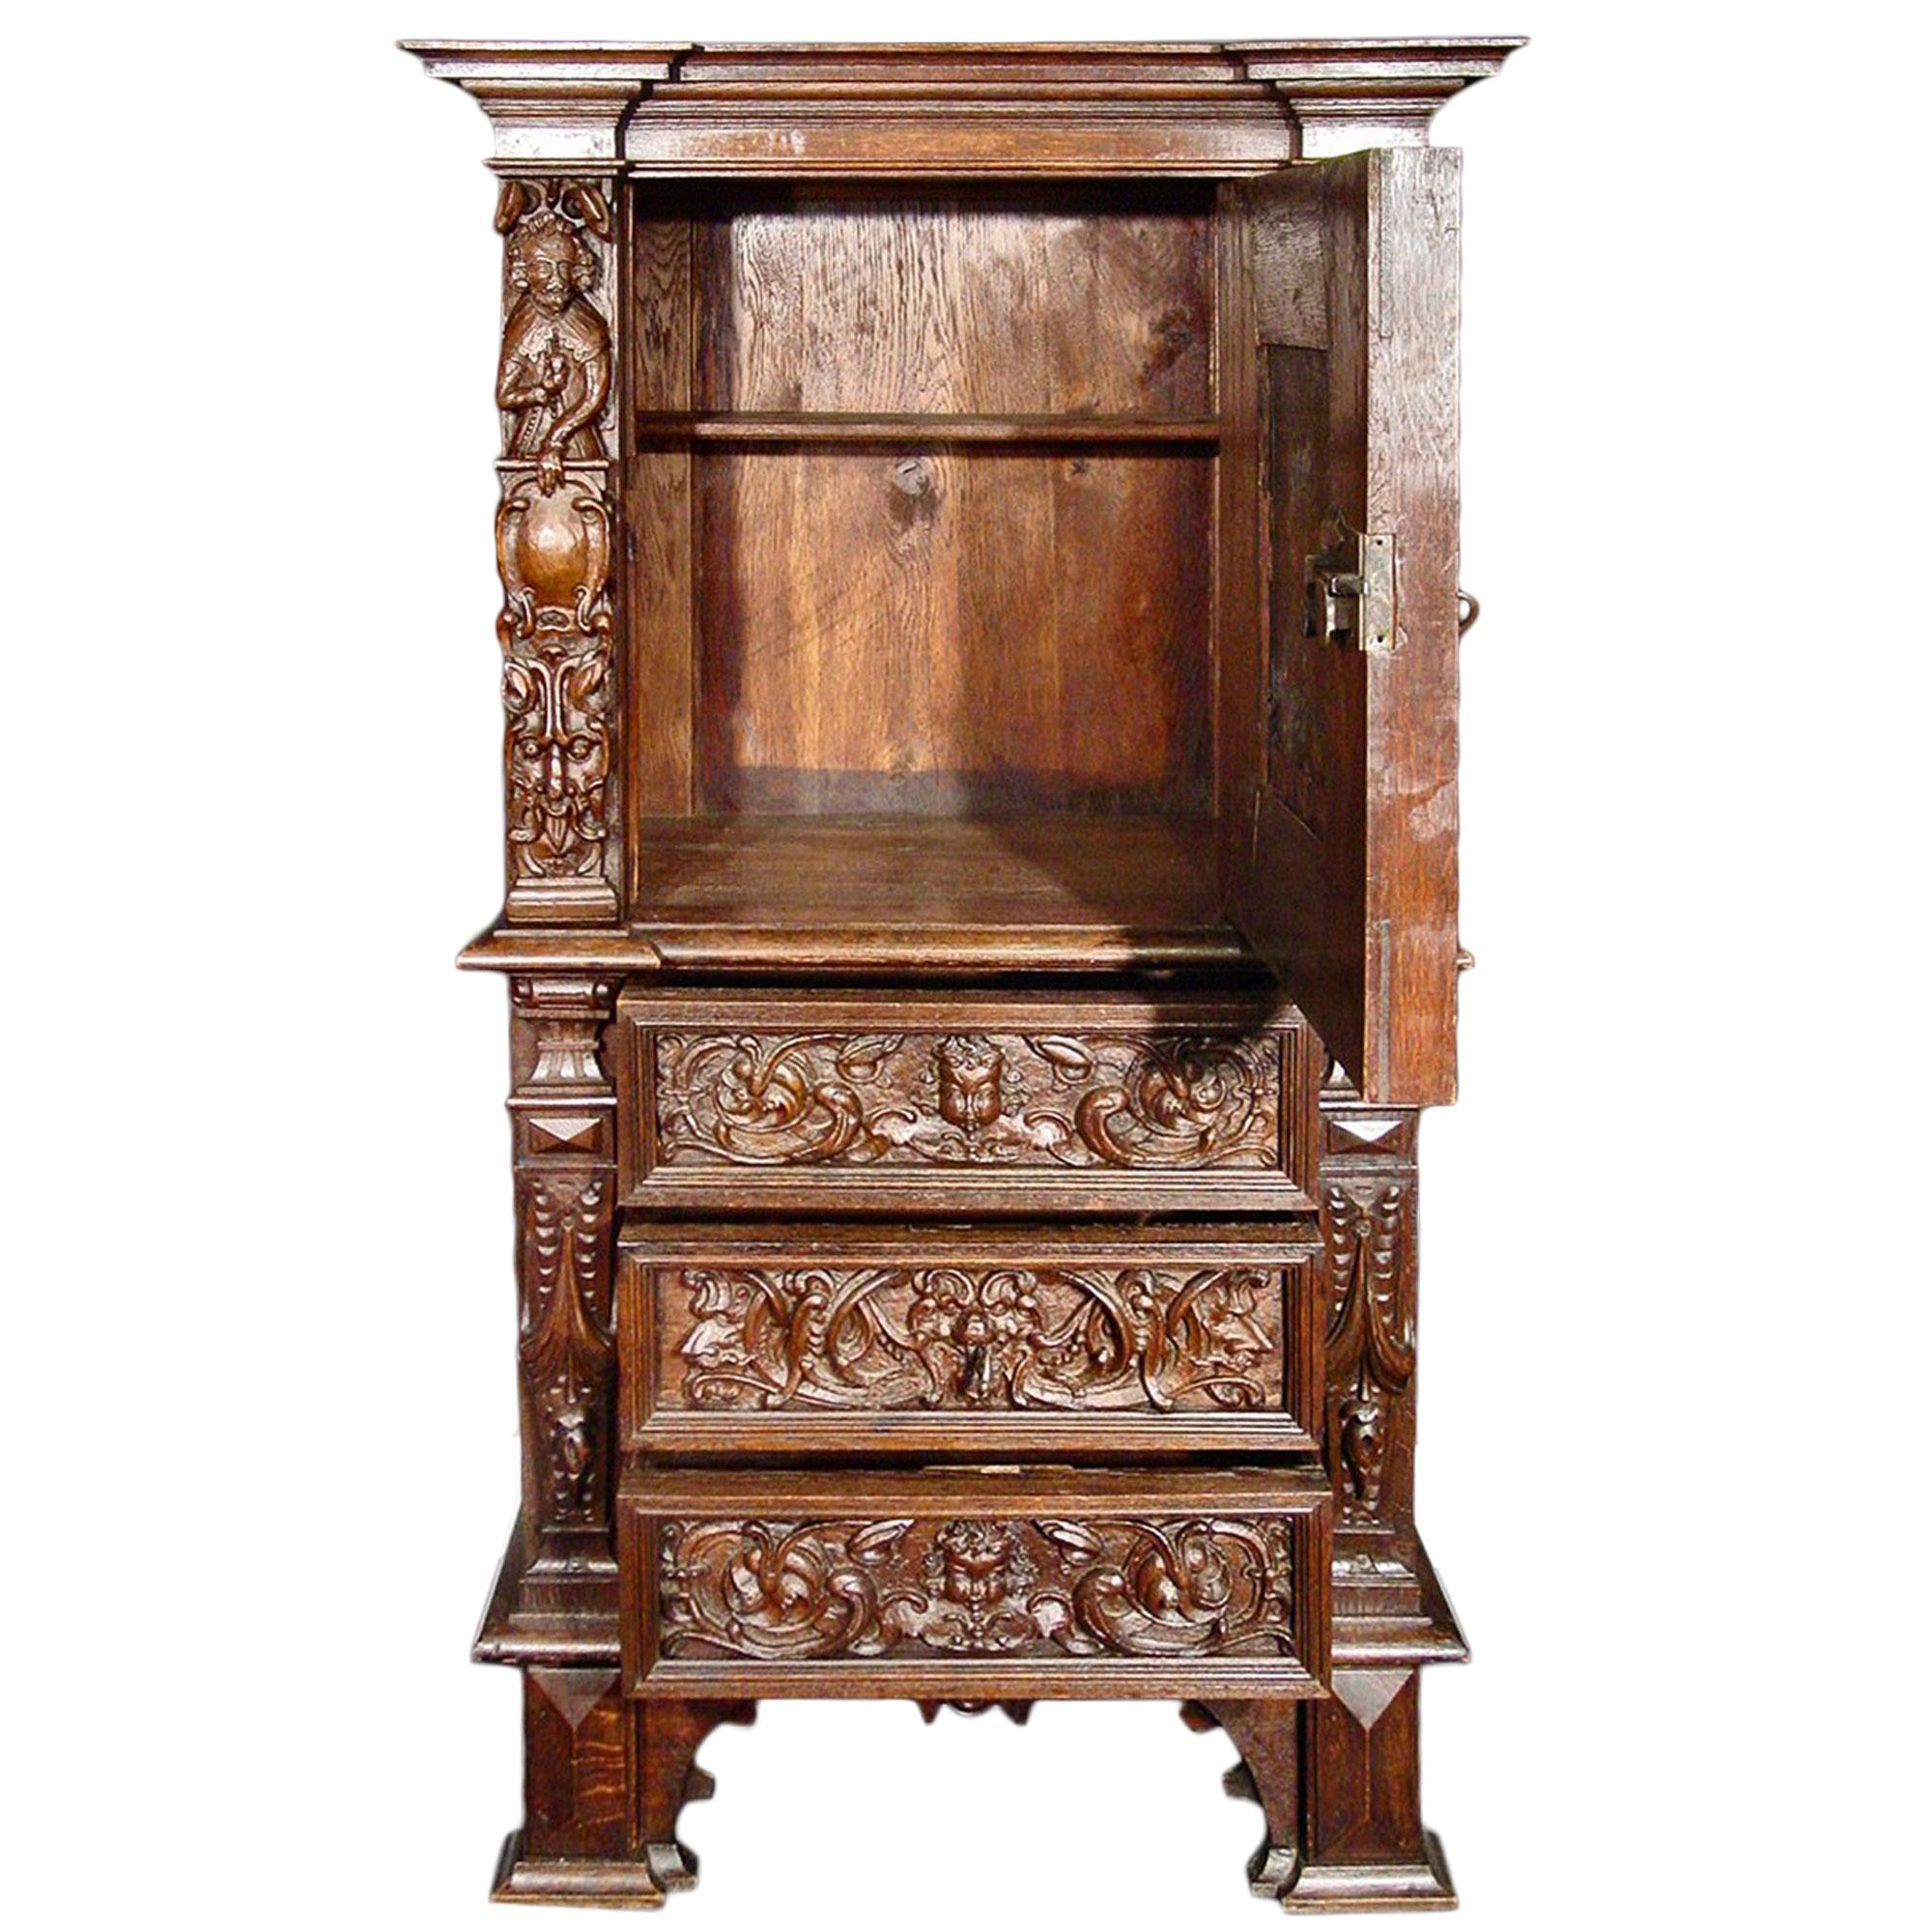 A heavily and richly carved Italian Renaissance st. mid 19th Century Oak side cabinet with one door and three drawers. The whole has exquisitely carved scrolled foliage design amidst angel faces and gargoyles. The door has a scene of Jesus, Mary and